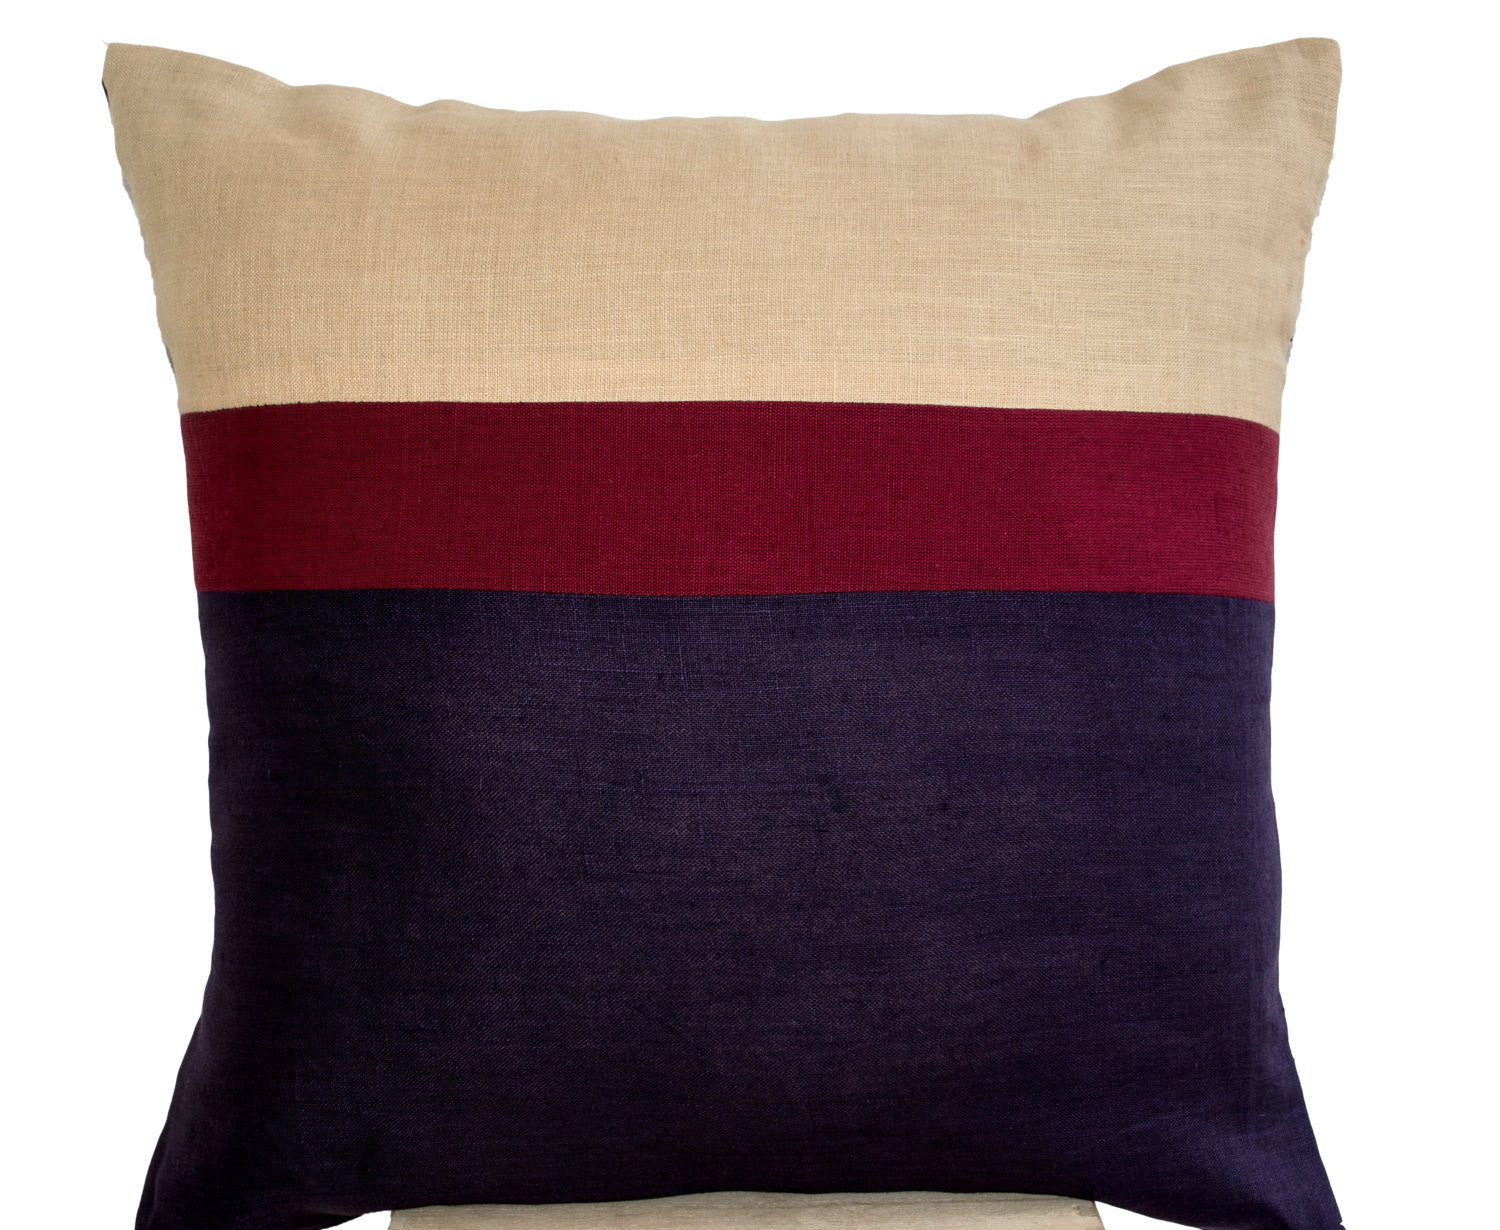 Handmade purple, beige, red pillow cover with color block